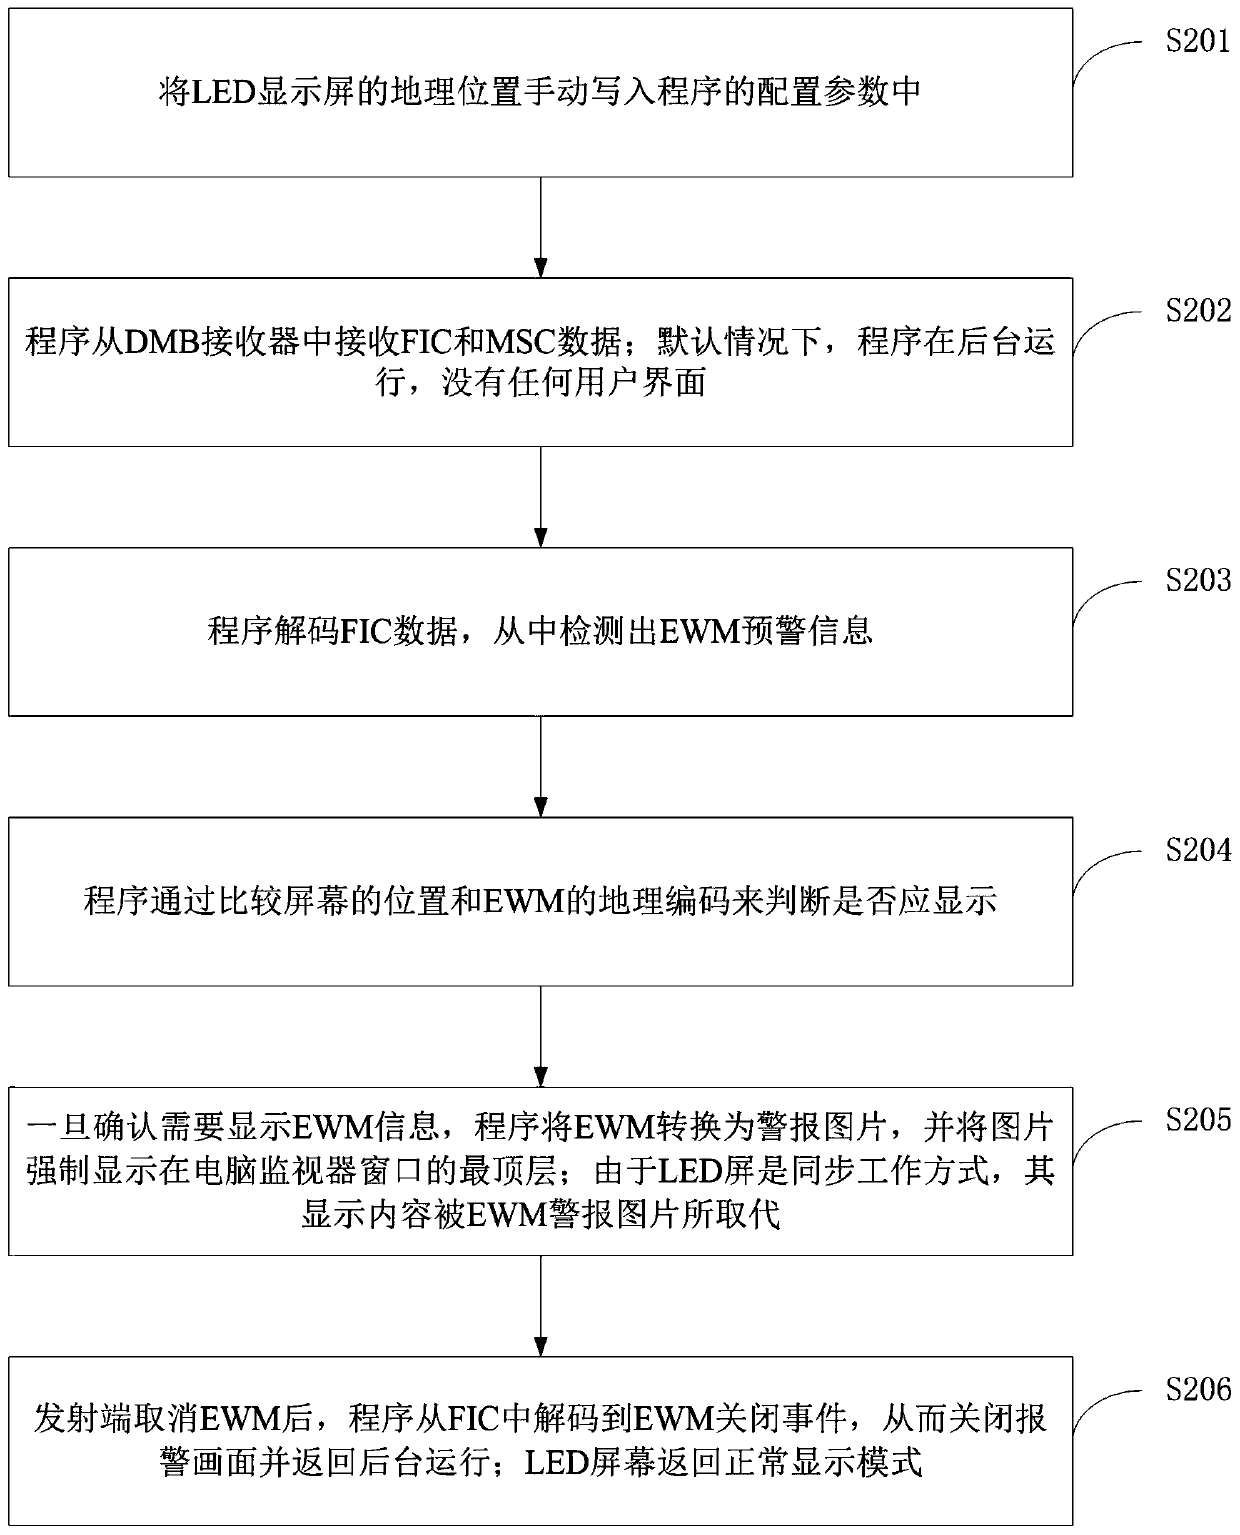 A method for receiving DMB early warning information by a synchronous LED screen